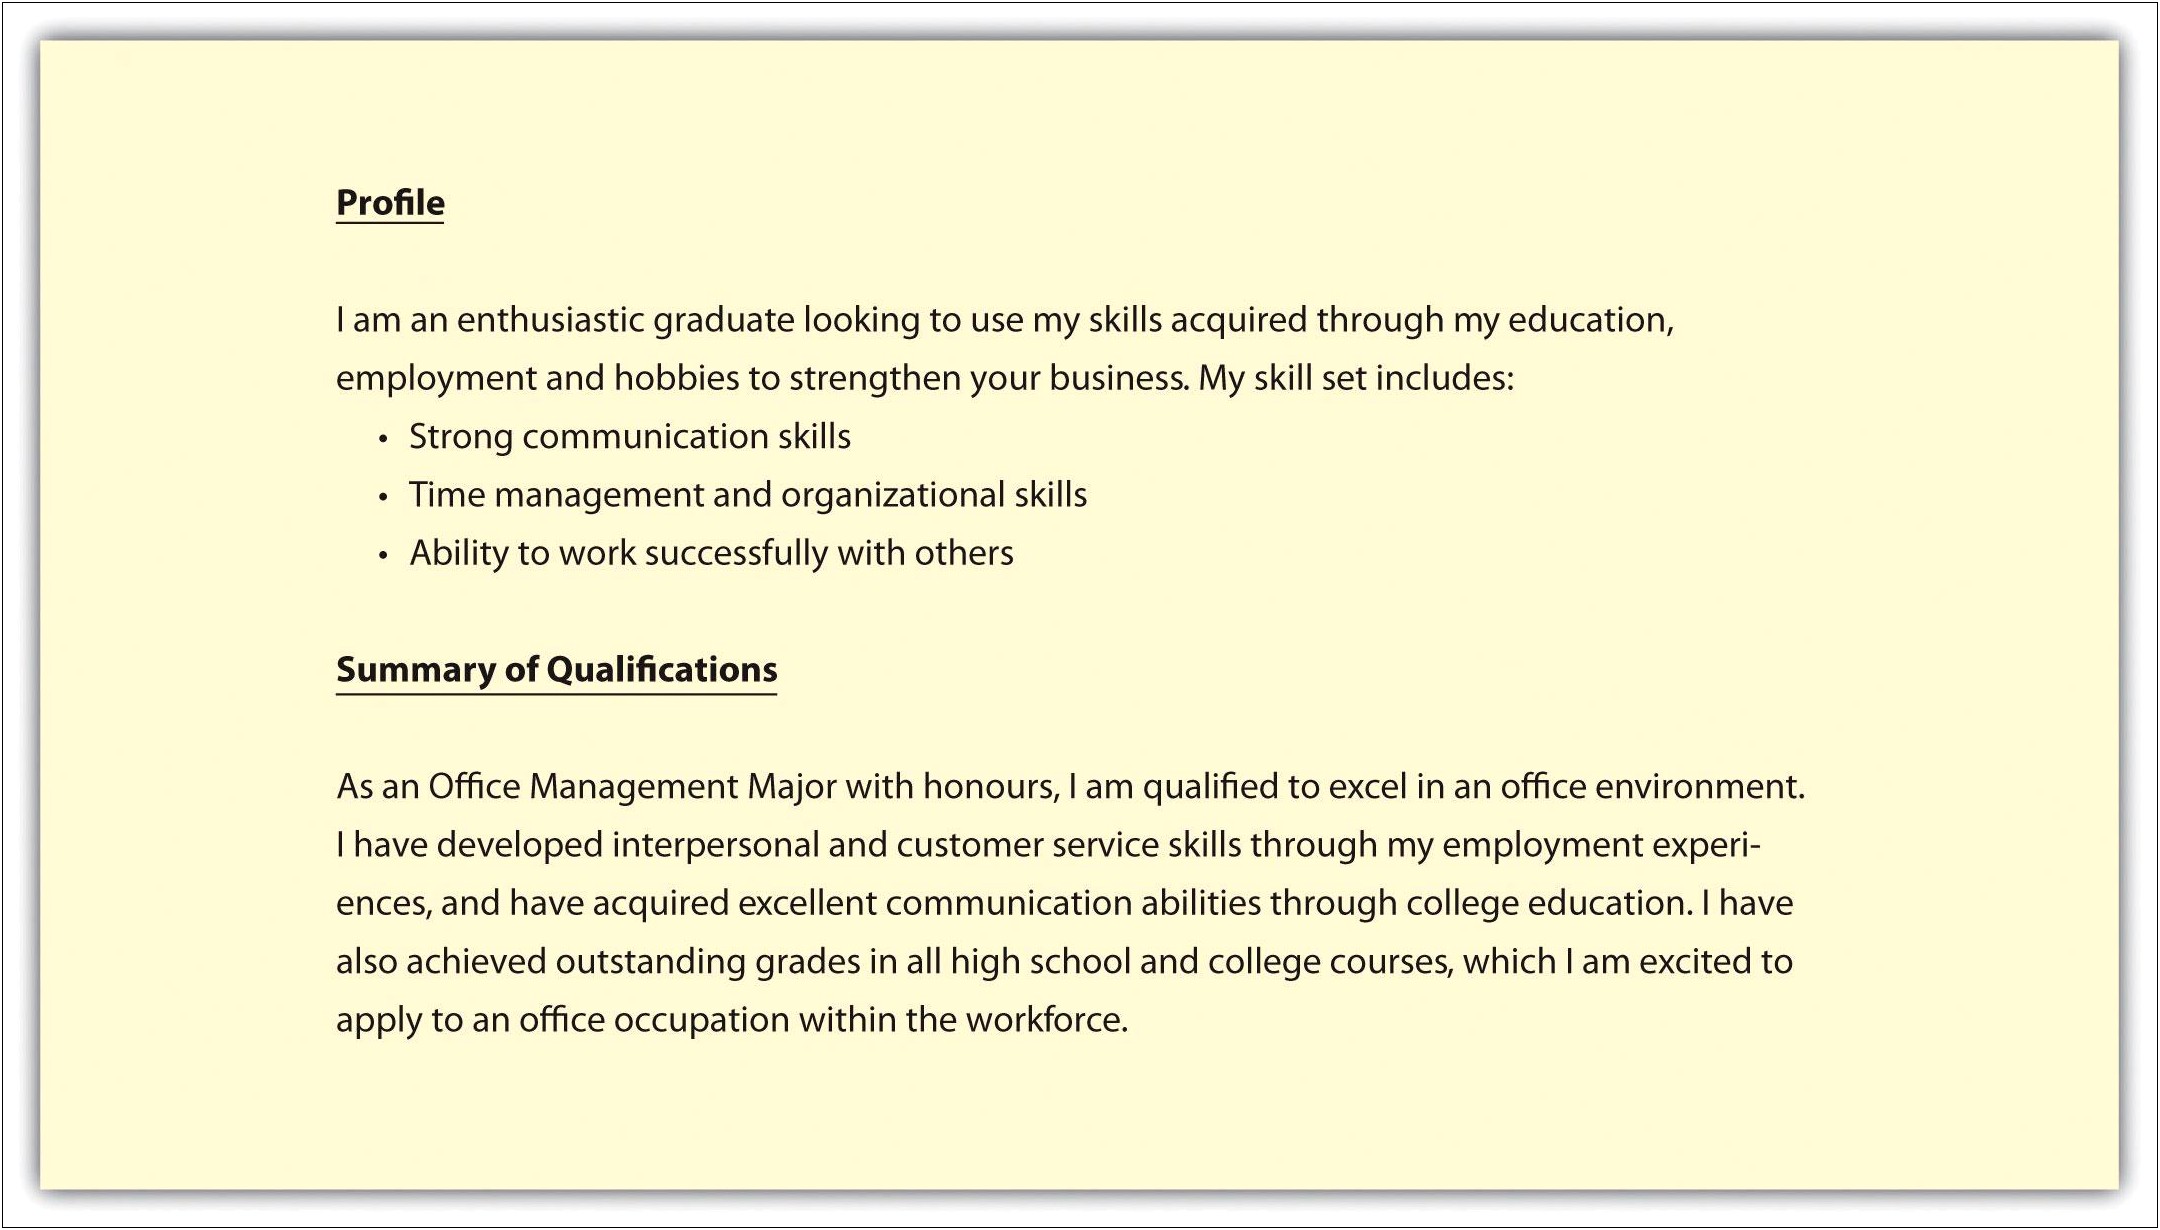 Acquired Skills And Abilities Section Of Resume